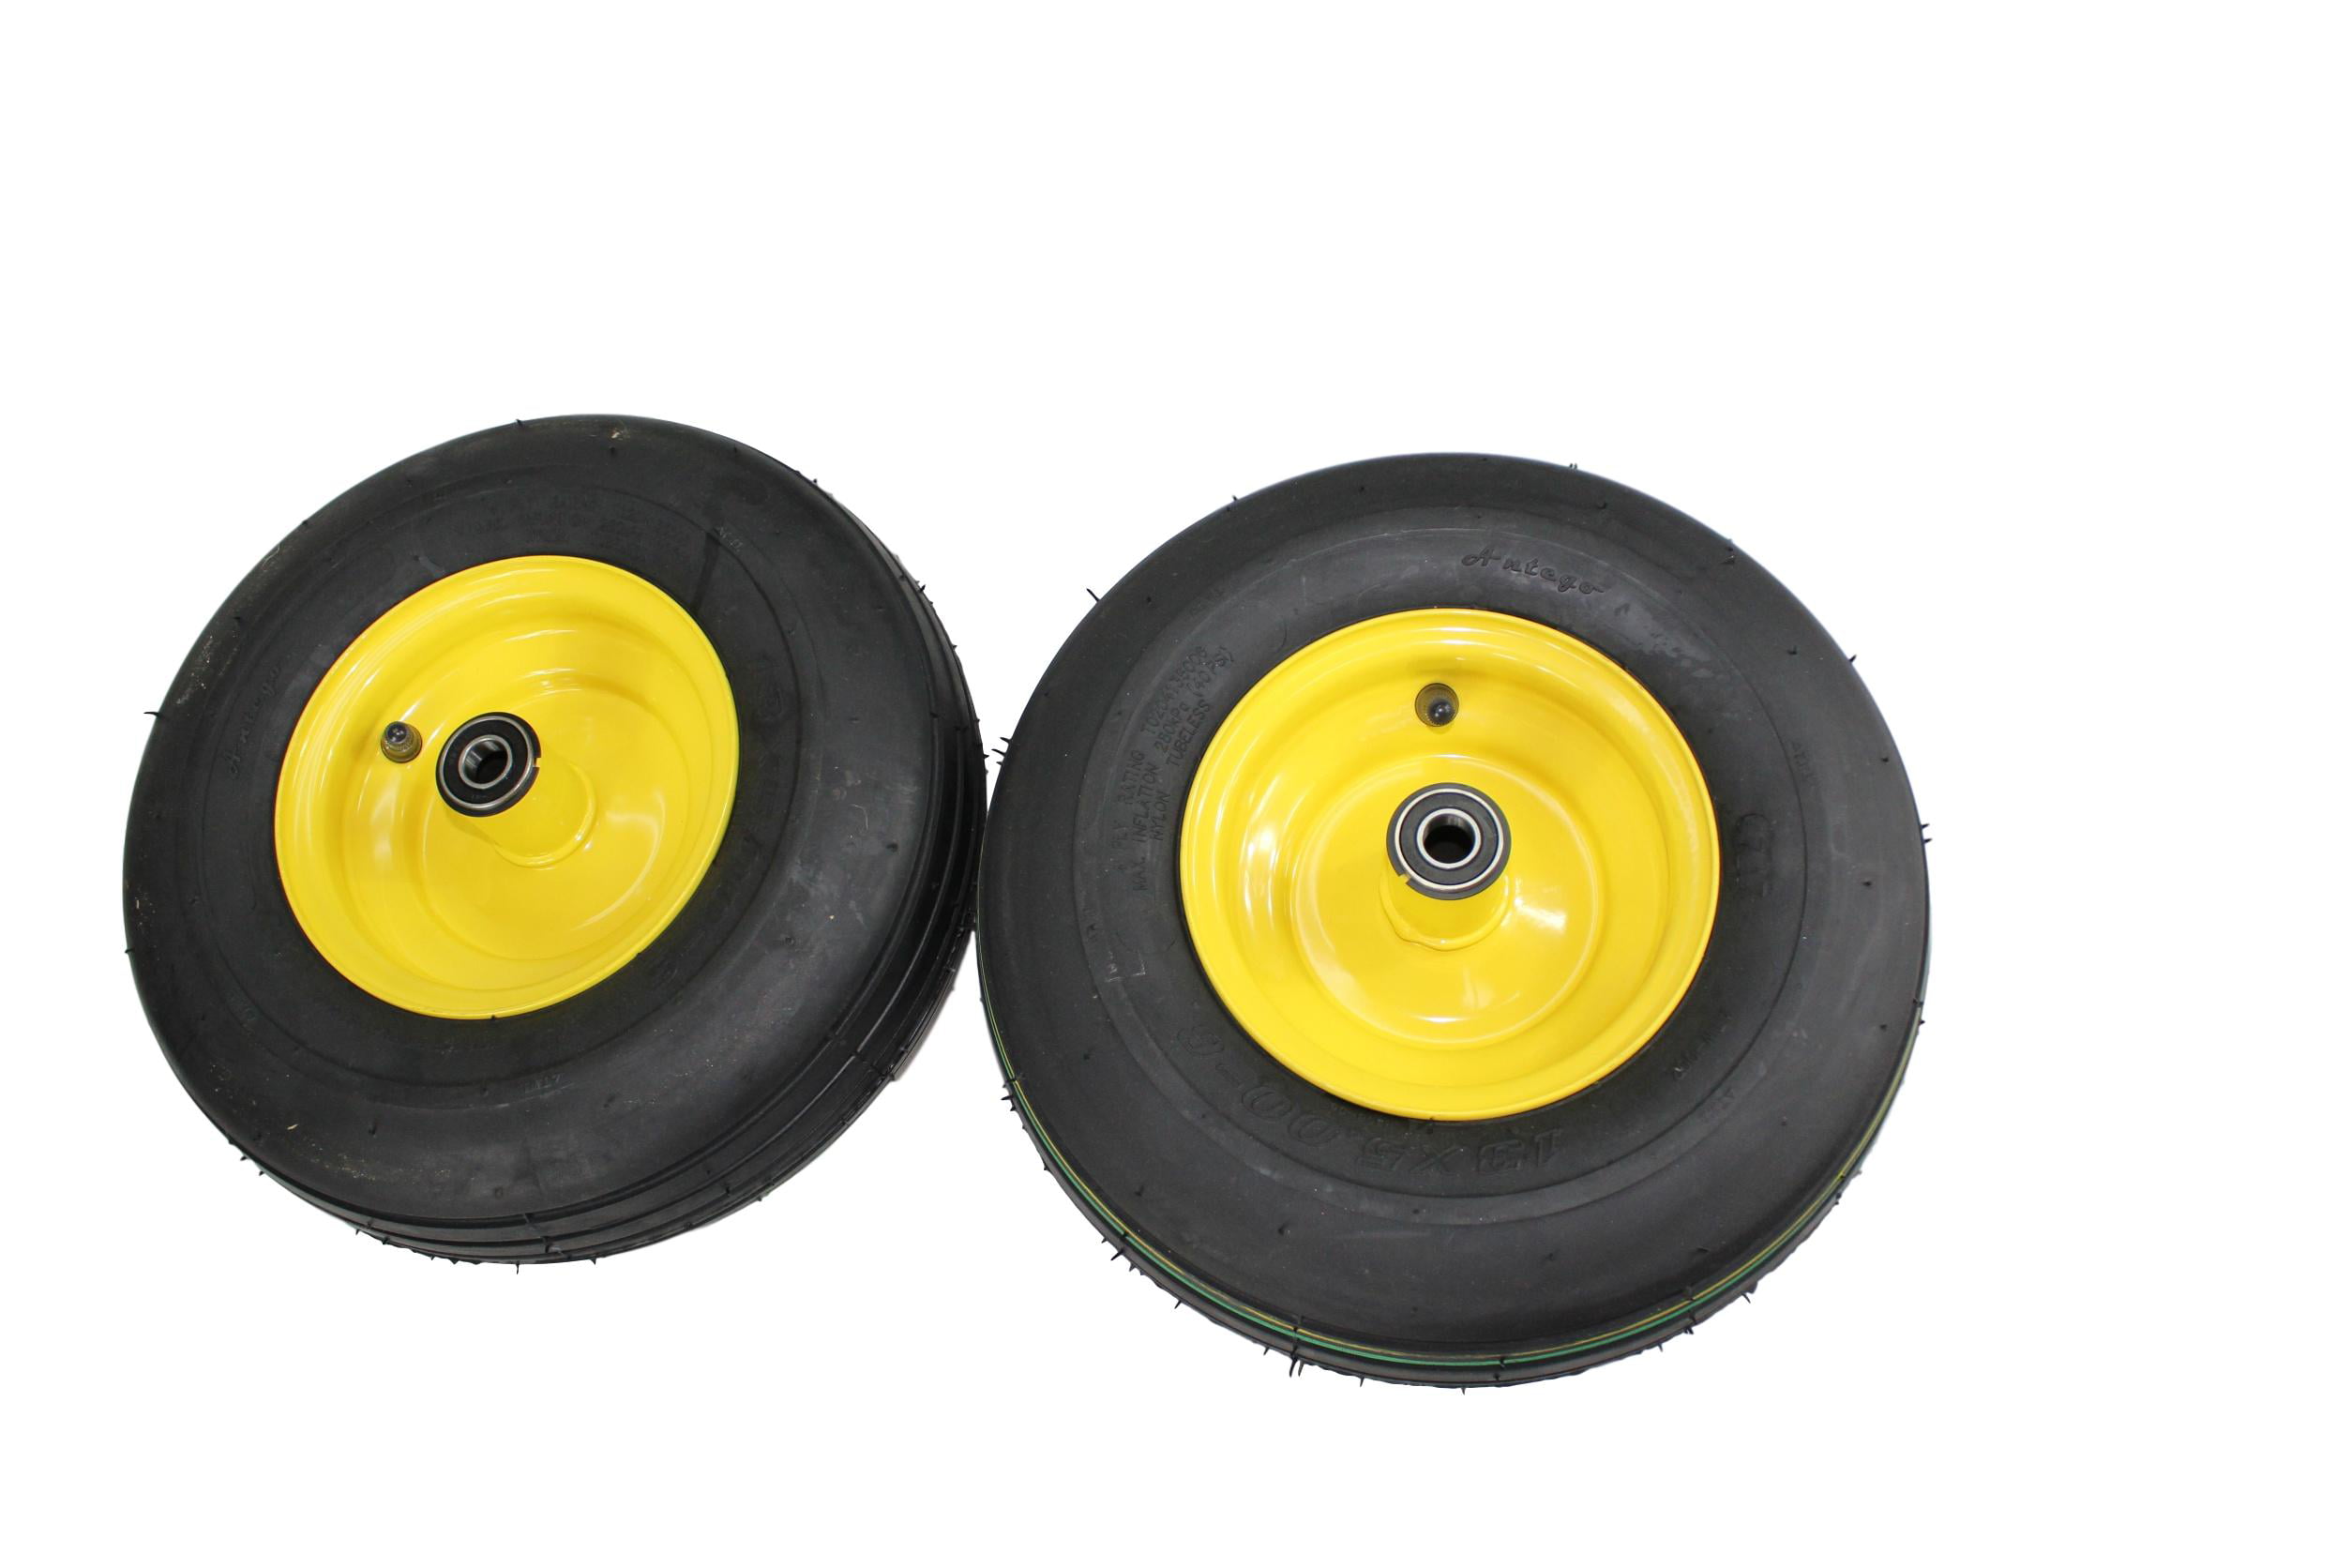 Set of 2 15x6.00-6 Tires & Wheels 4 Ply for Lawn & Garden Mower Turf Tires .75 Bearing 